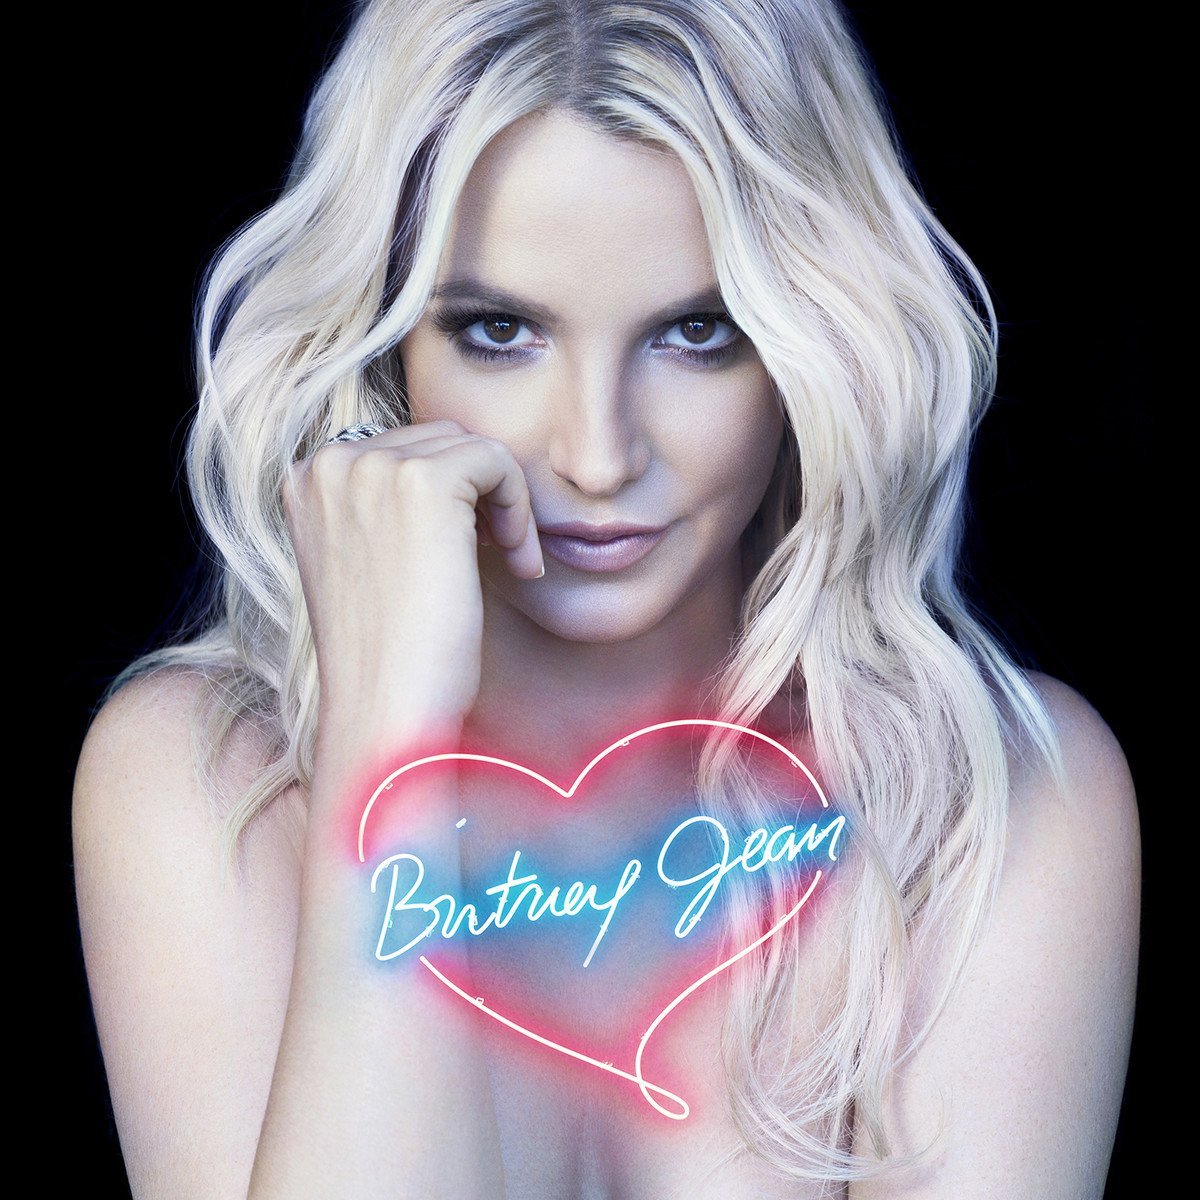 News Added Oct 15, 2013 Britney Spears has announced her eight album, titled "Britney Jean". This, Katy Perry and Lady Gaga - Makes for three hyped album downloads set to be released this autumn. It was first revealed that Spears was working on her eighth studio album in December 2012. will.i.am had been enlisted as […]